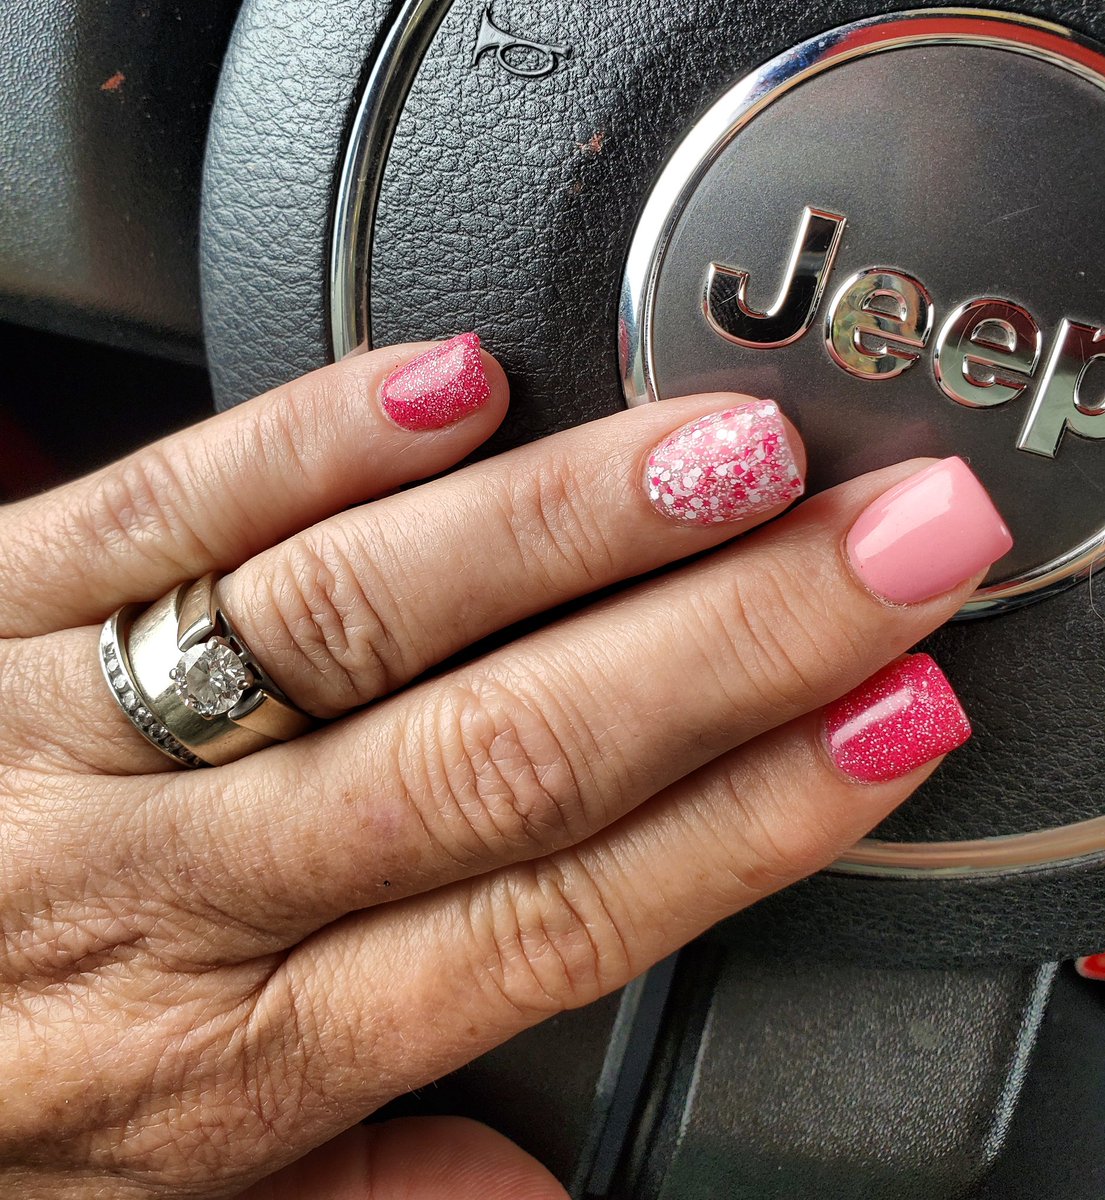 February #photooftheday -pink. #embracingbeauty
❤ pink nails and my jeep ❤
#jeepgirl #jeepsysoul #nails #valentinesday